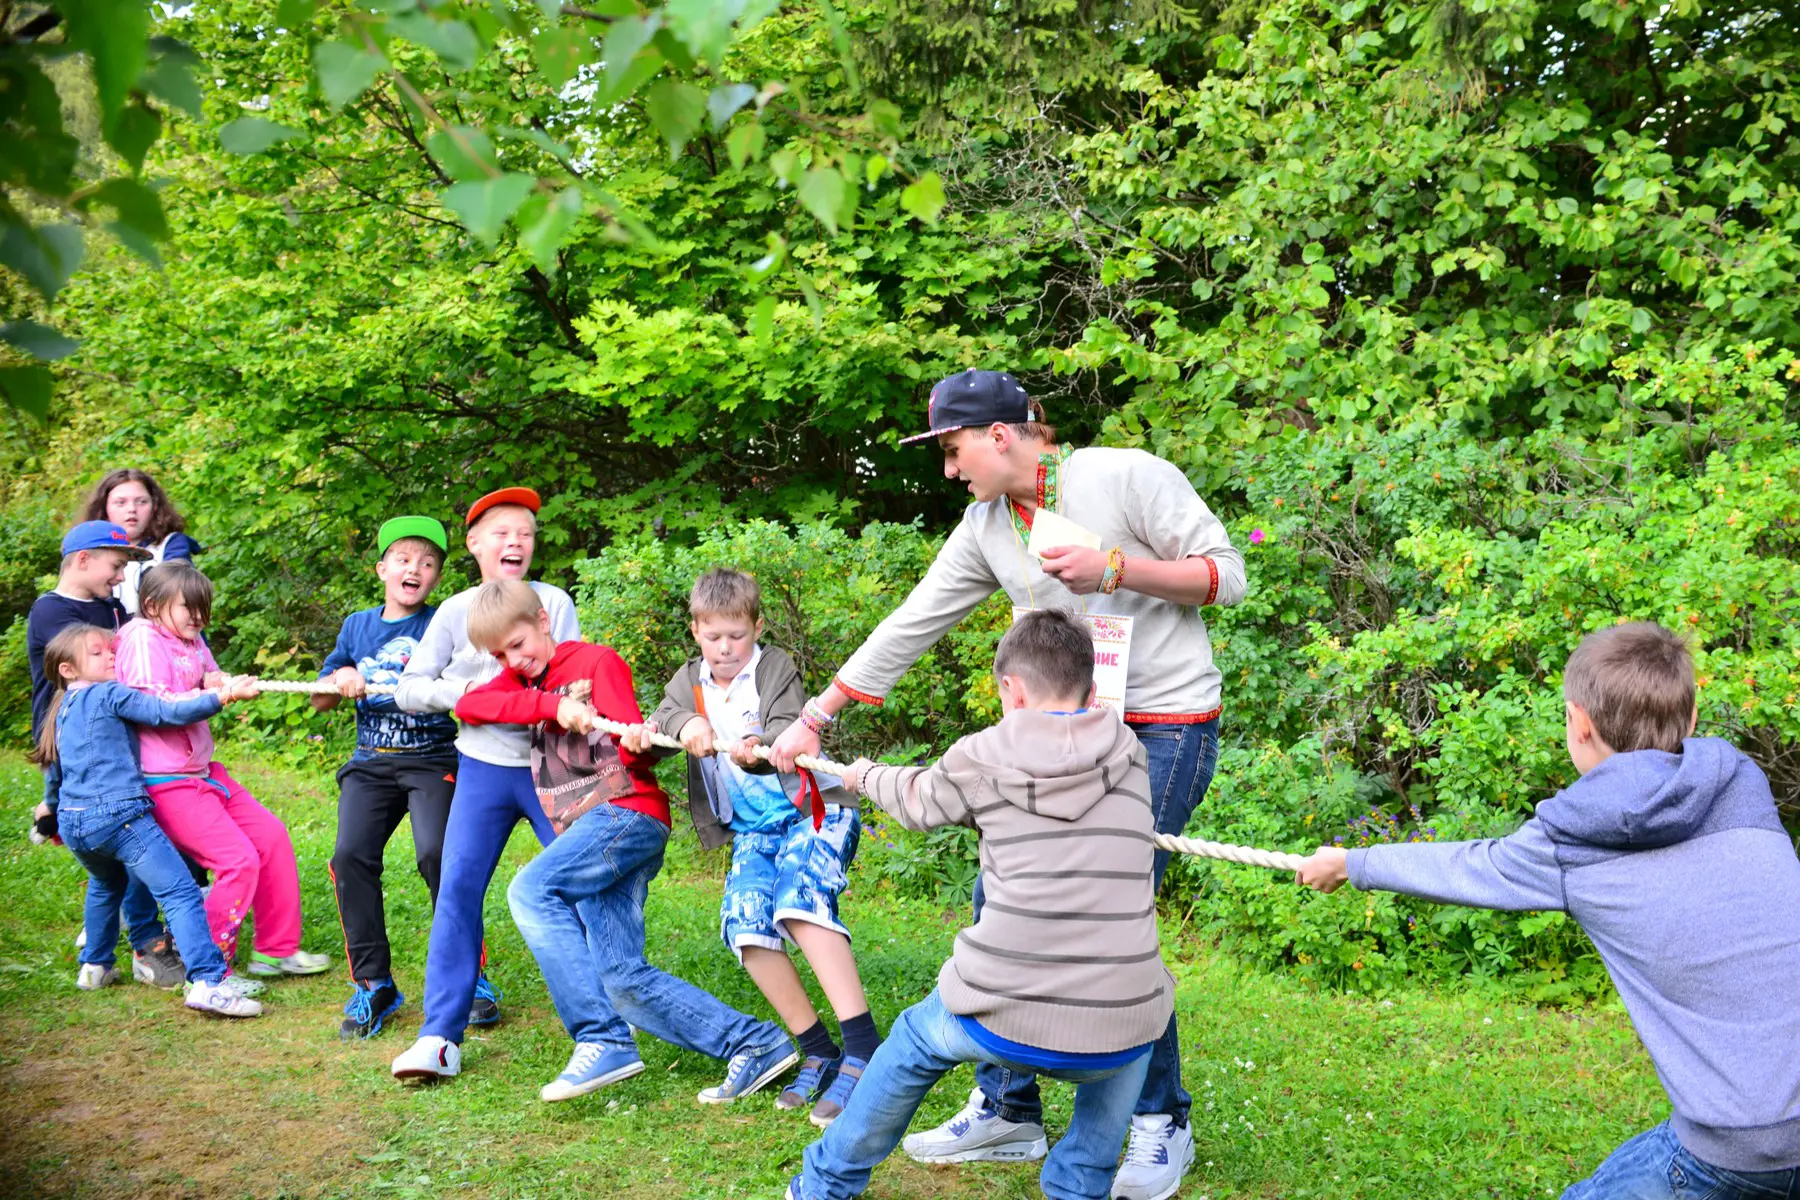 children play tug of war amid greenery as a young man supervises them